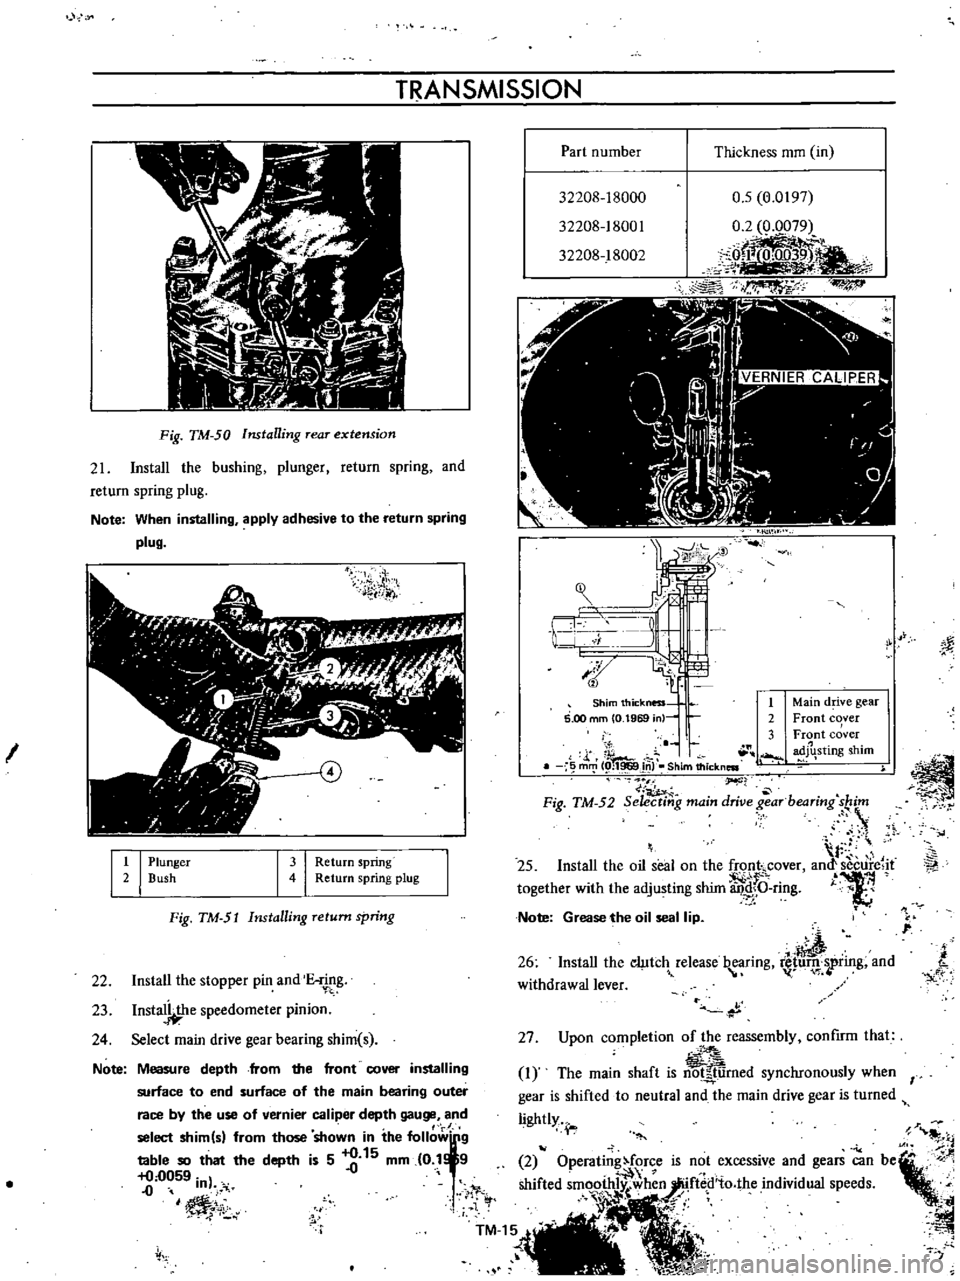 DATSUN B110 1973  Service Manual PDF 
YO

TRANSMISSION

27

Upon 
completion 
of 
the

reassembly 
confIrm 
that

Measure

depth 
from

the 
front

cover 
installing

I 
The 
main

shaft 
is

notJ
tiirned 
synchronously 
when

I

surface